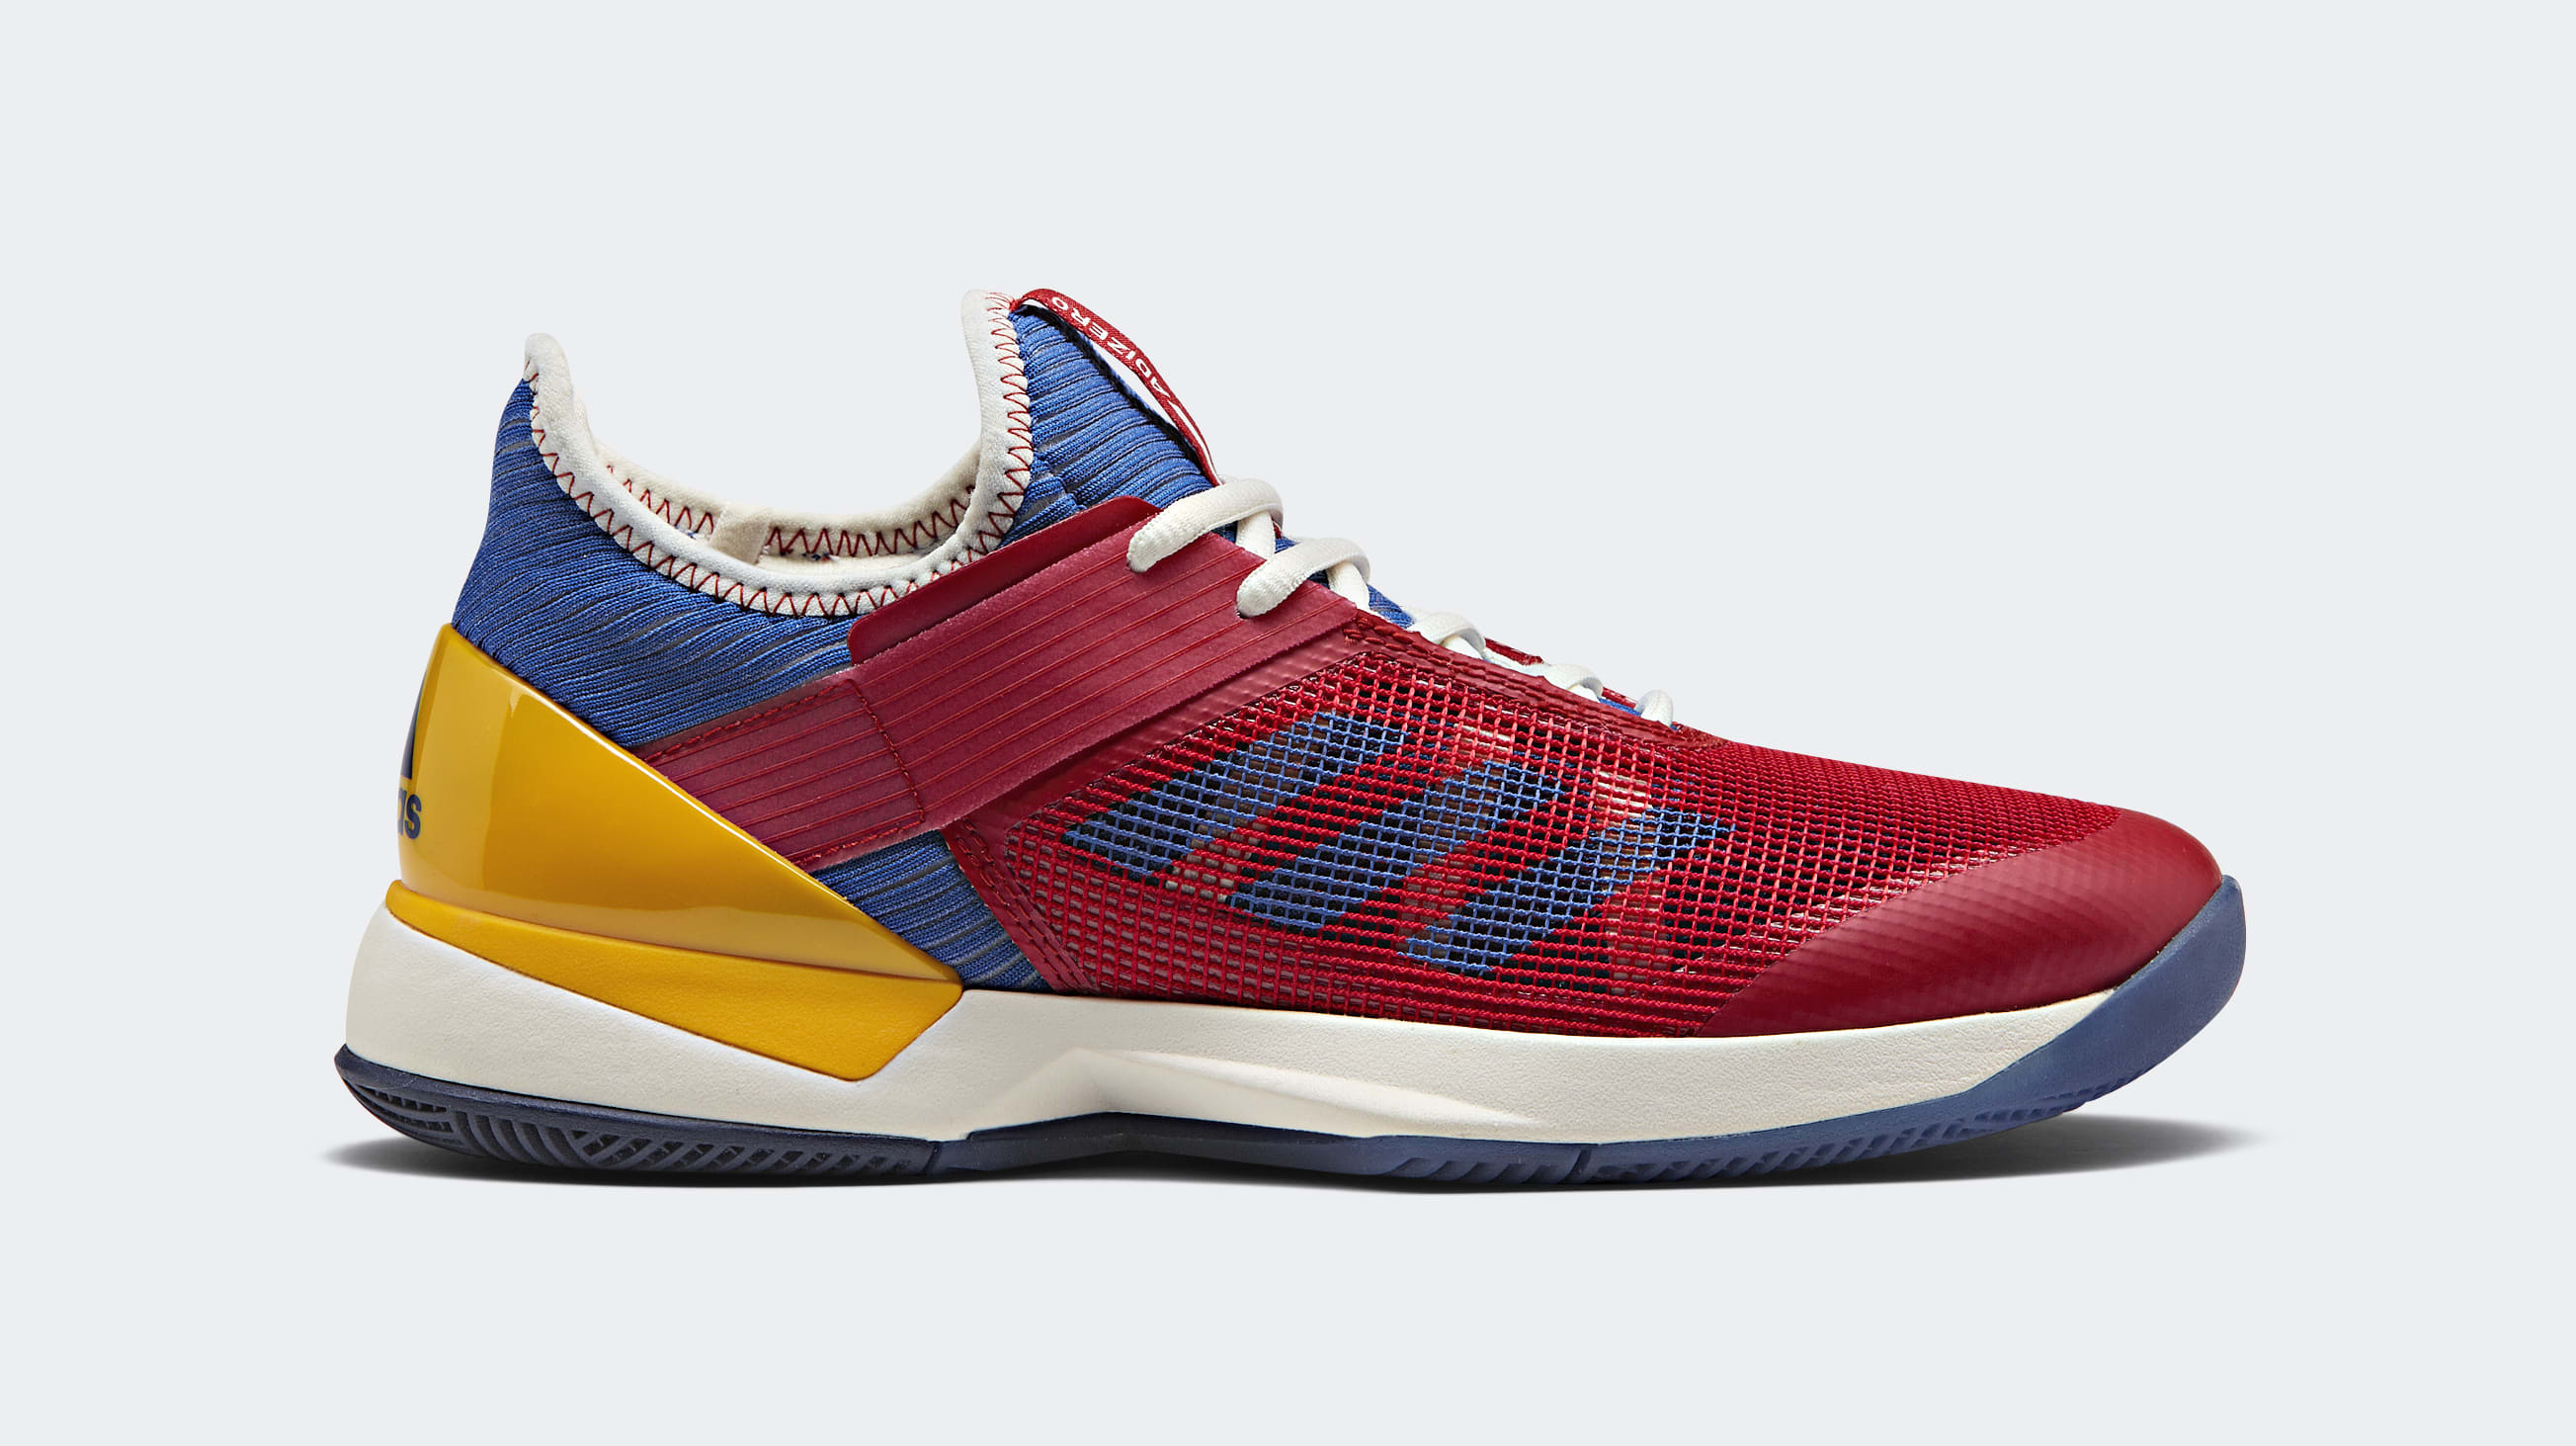 Adidas Tennis by Pharrell Ubersonic 3.0 (Lateral)